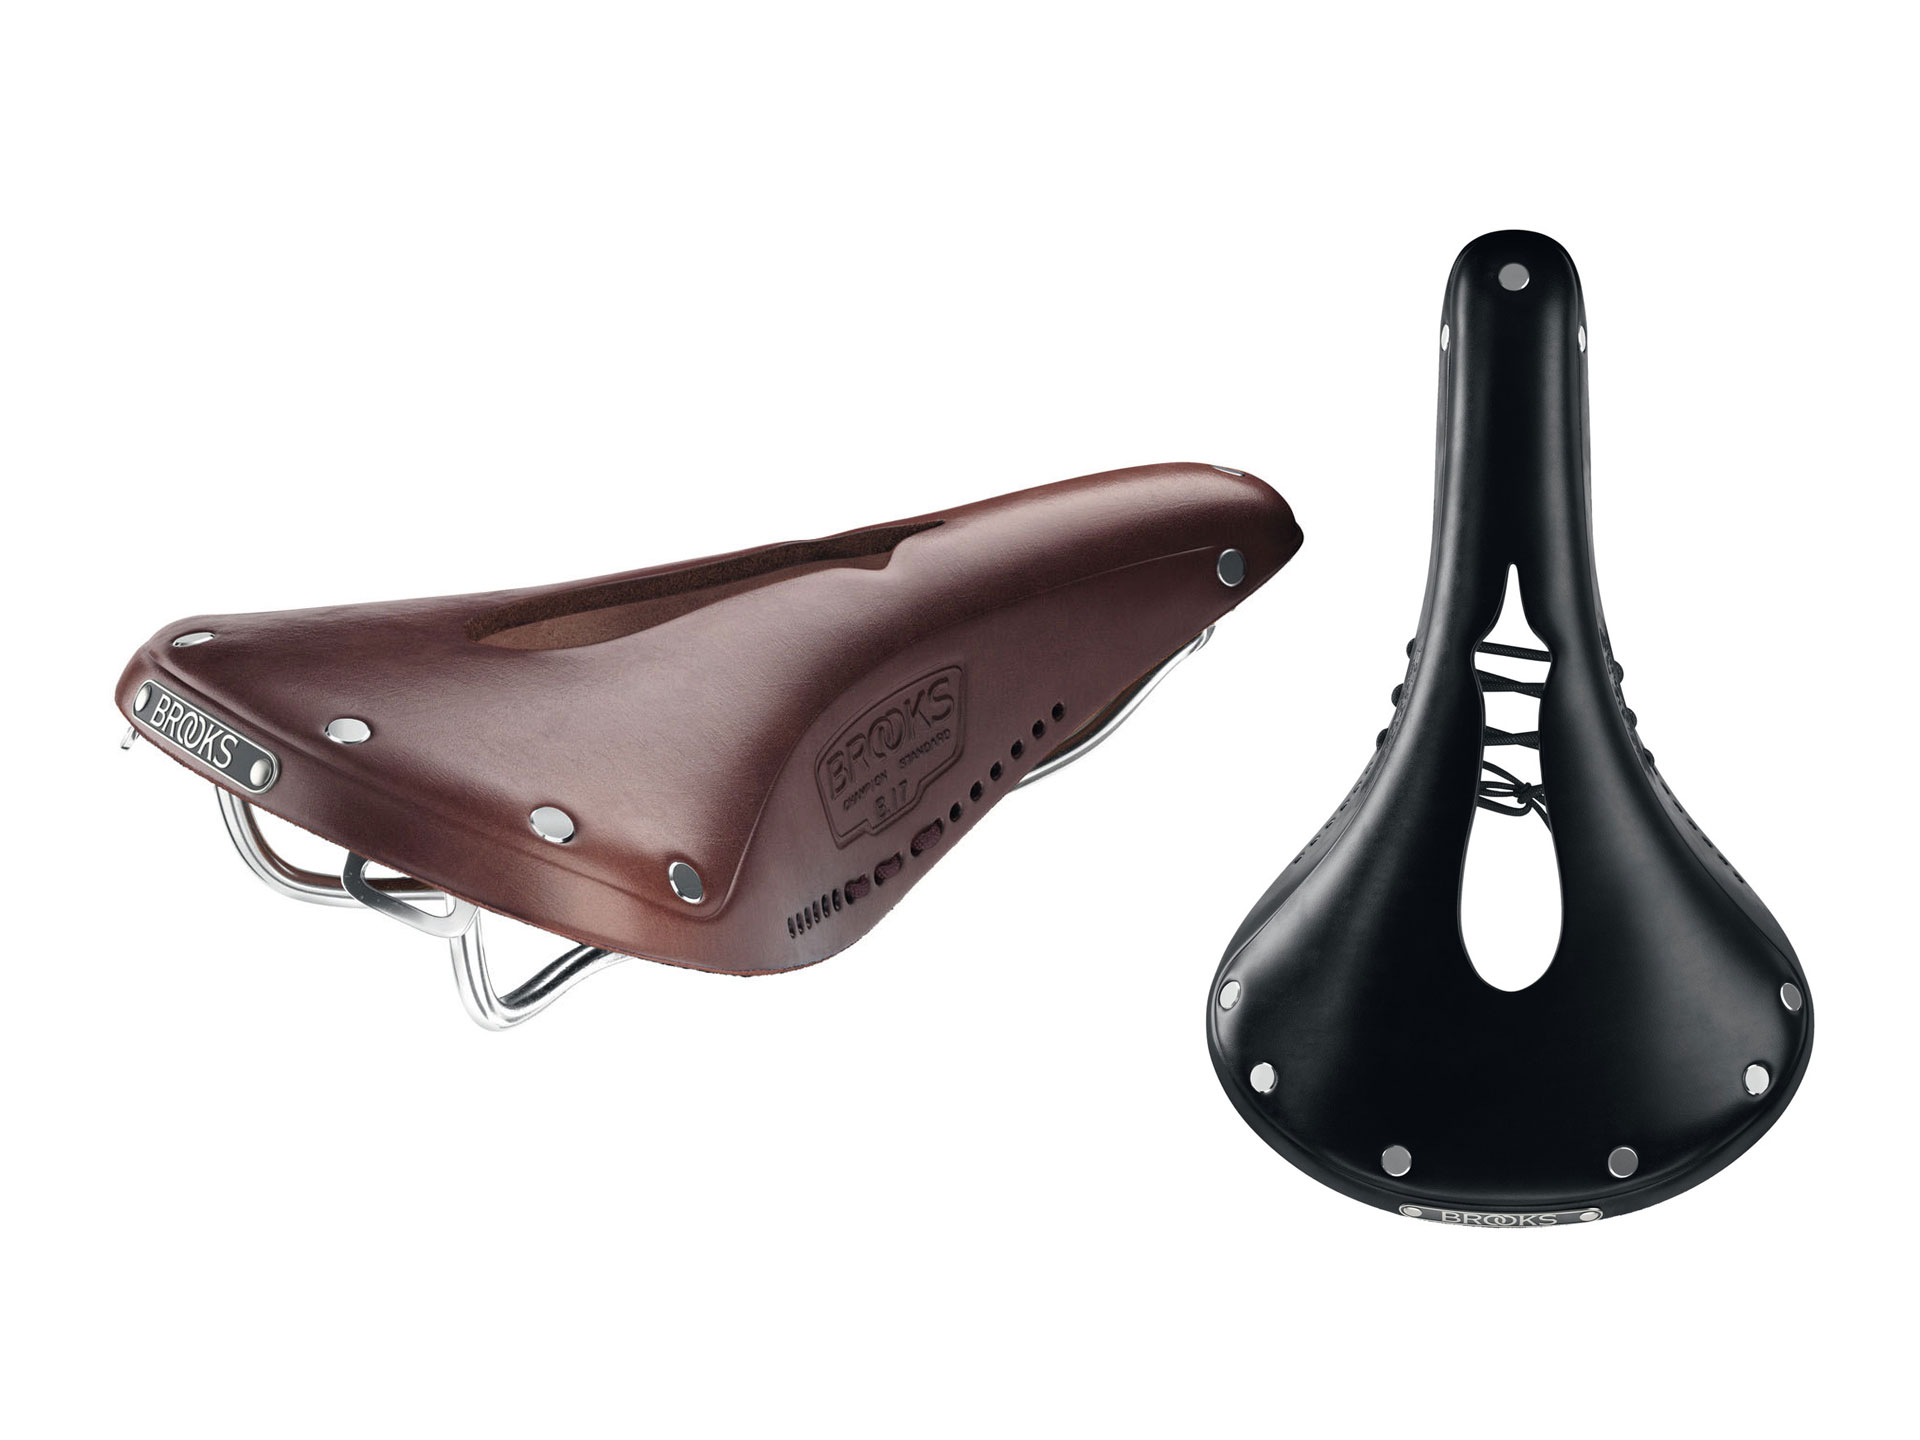 Brooks England B17 Carved Leather Saddle - Handcrafted in England